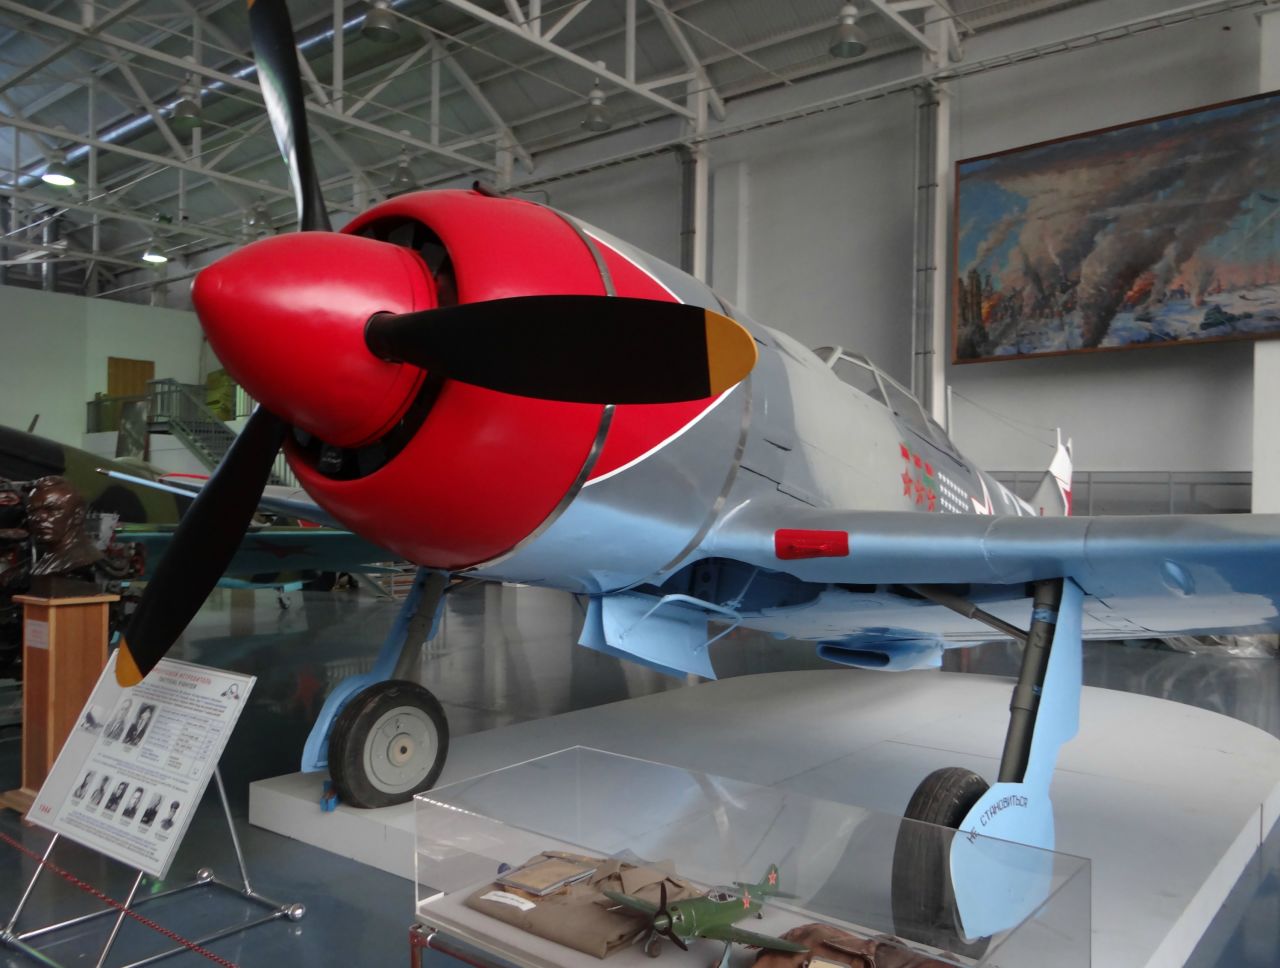 Soviet fighter aircraft were often of revolutionary design and airplanes such as this Polikarpov were among the first monoplanes with retractable landing gear.